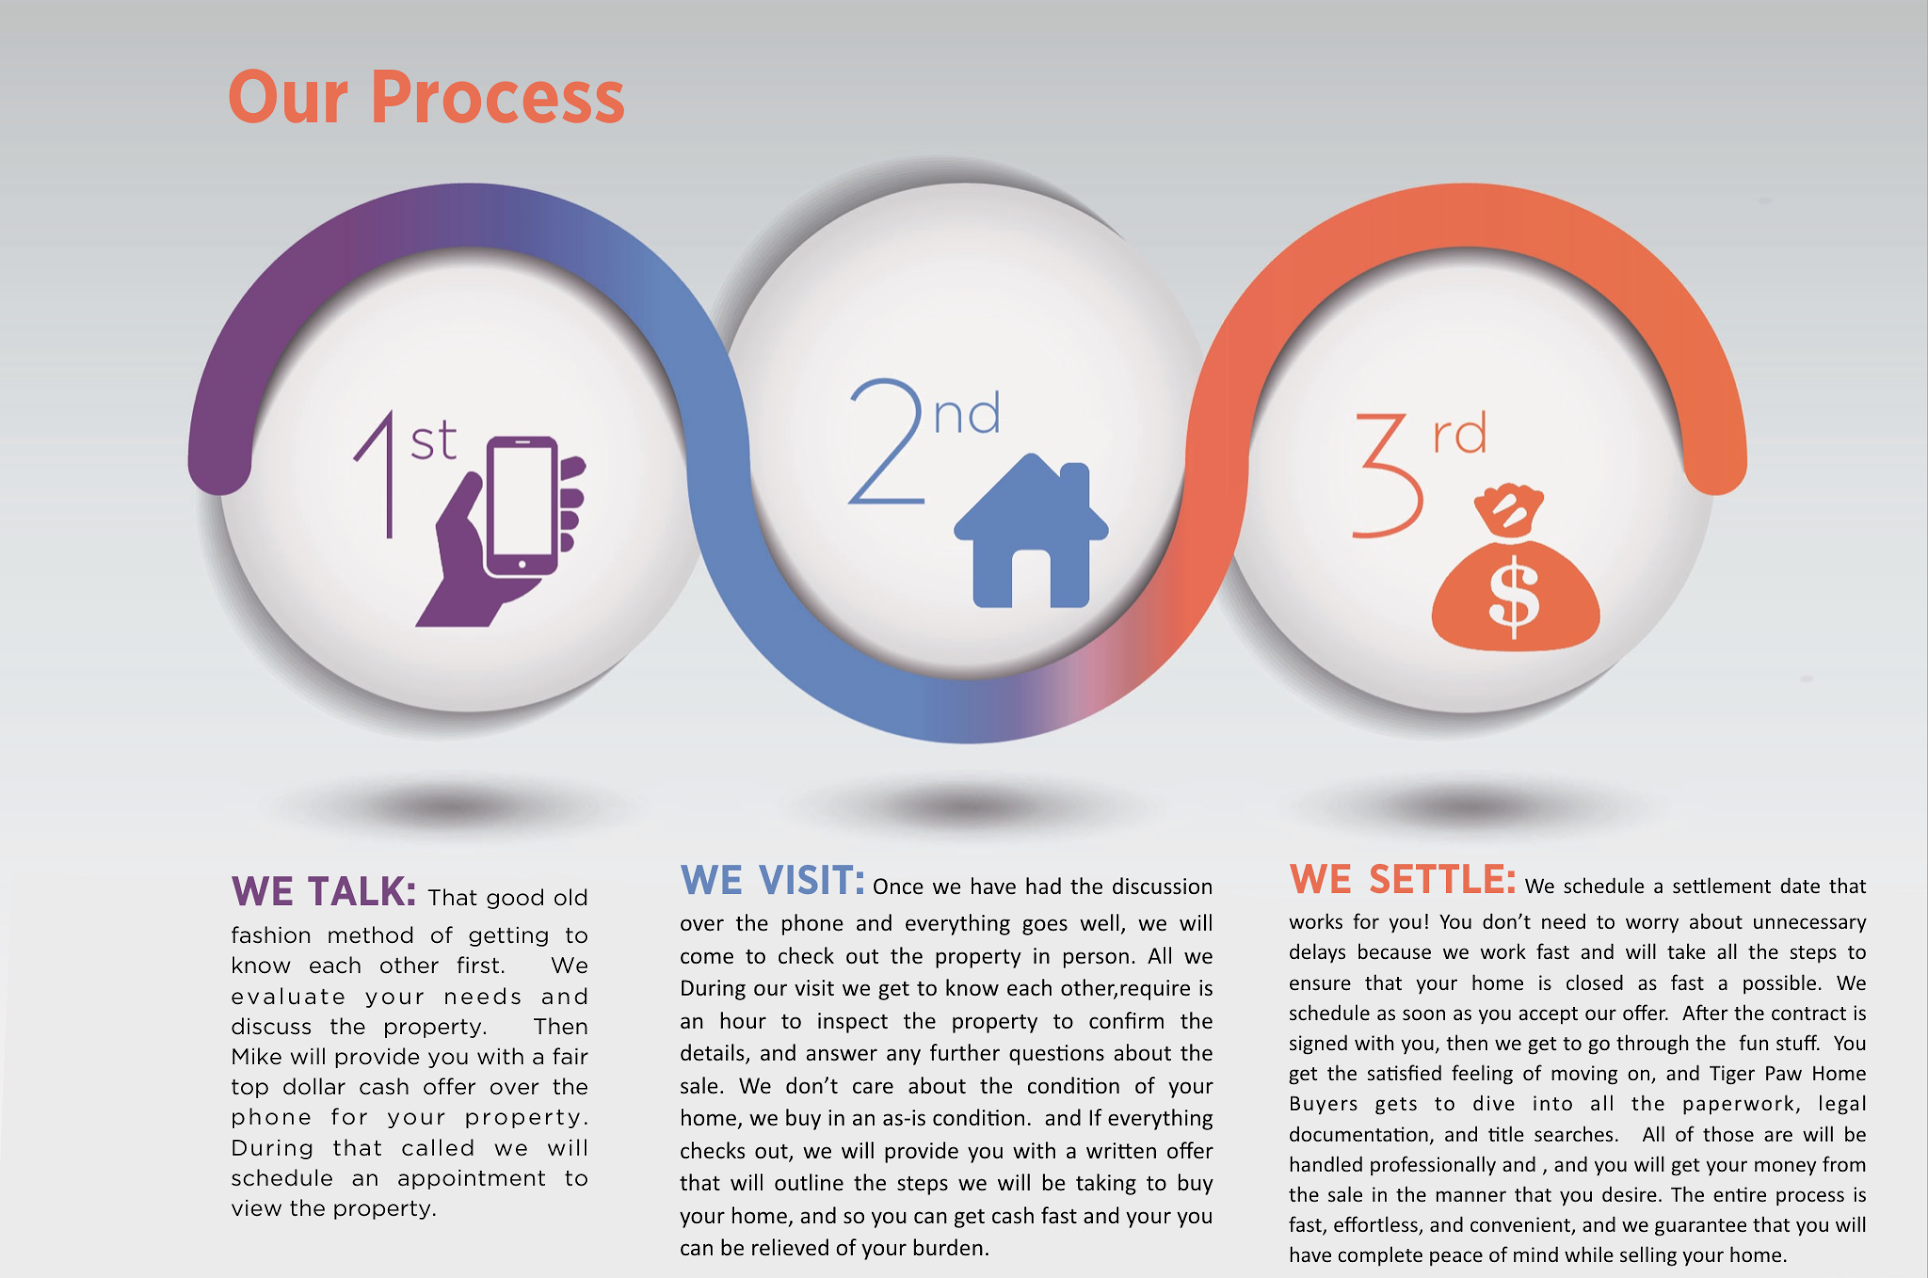 OUR PROCESS